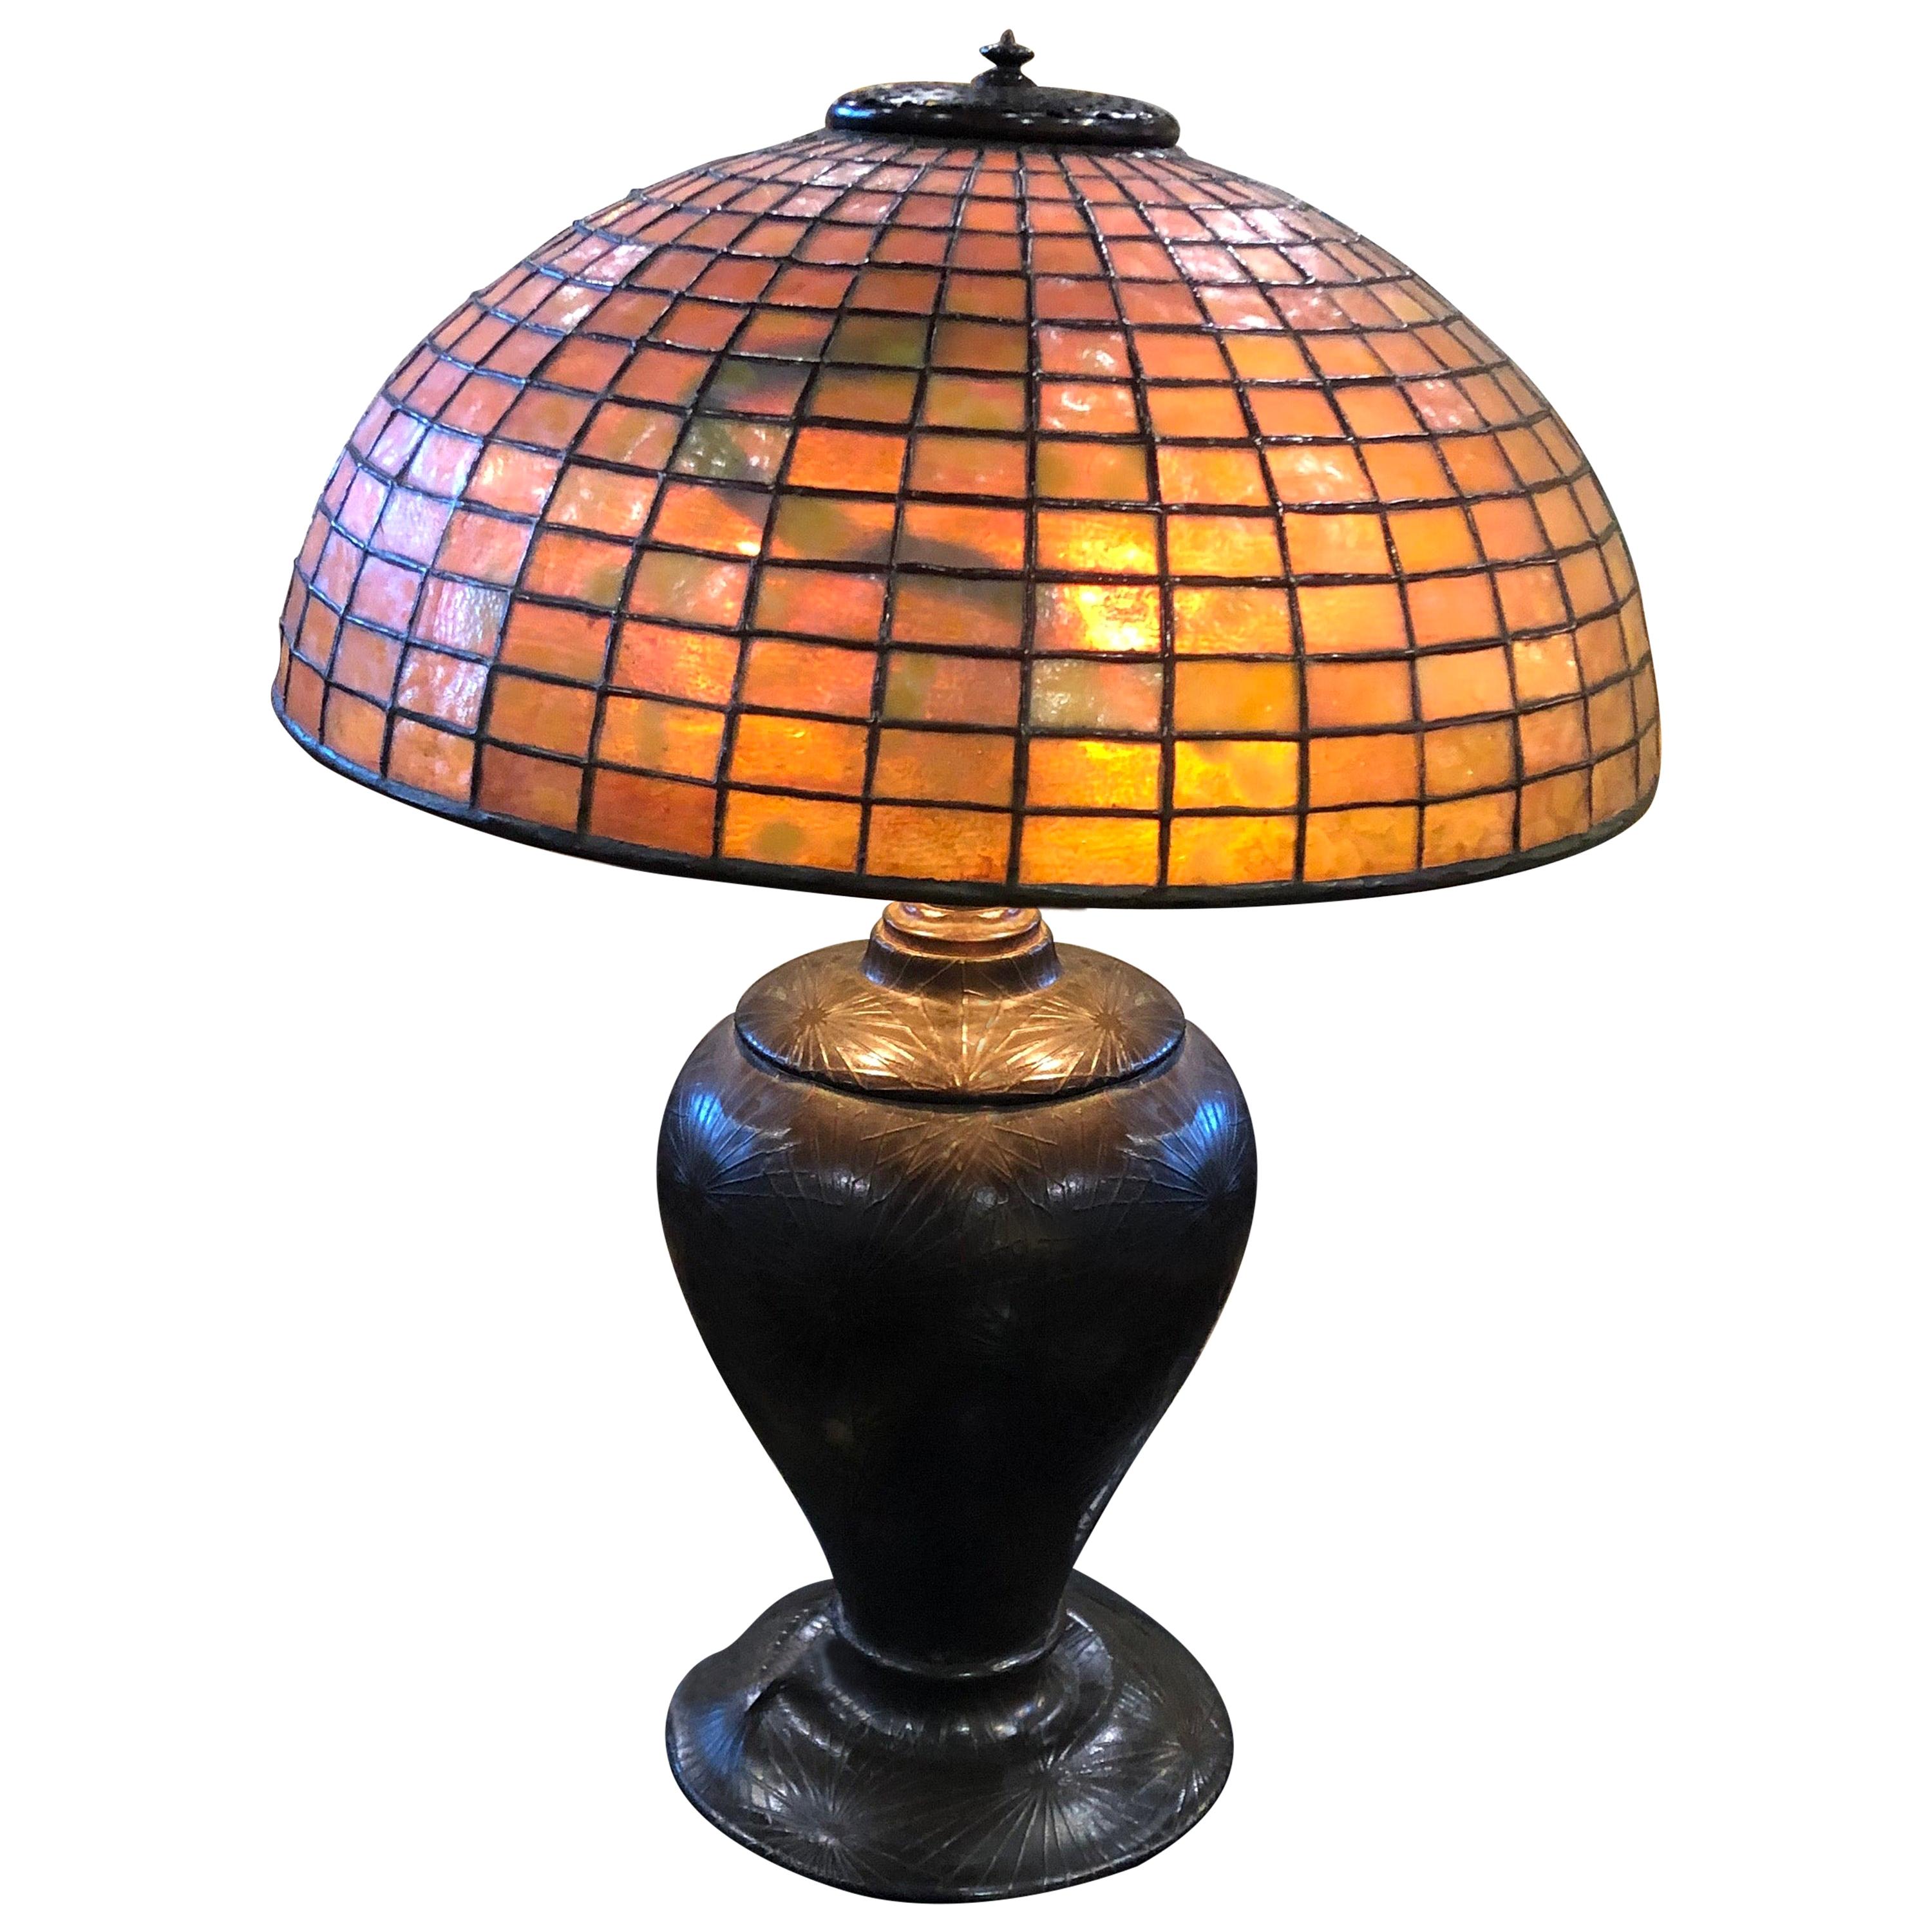 Signed Tiffany Lamp- Pine Needle Base with an Intact Amber Geometric Shade